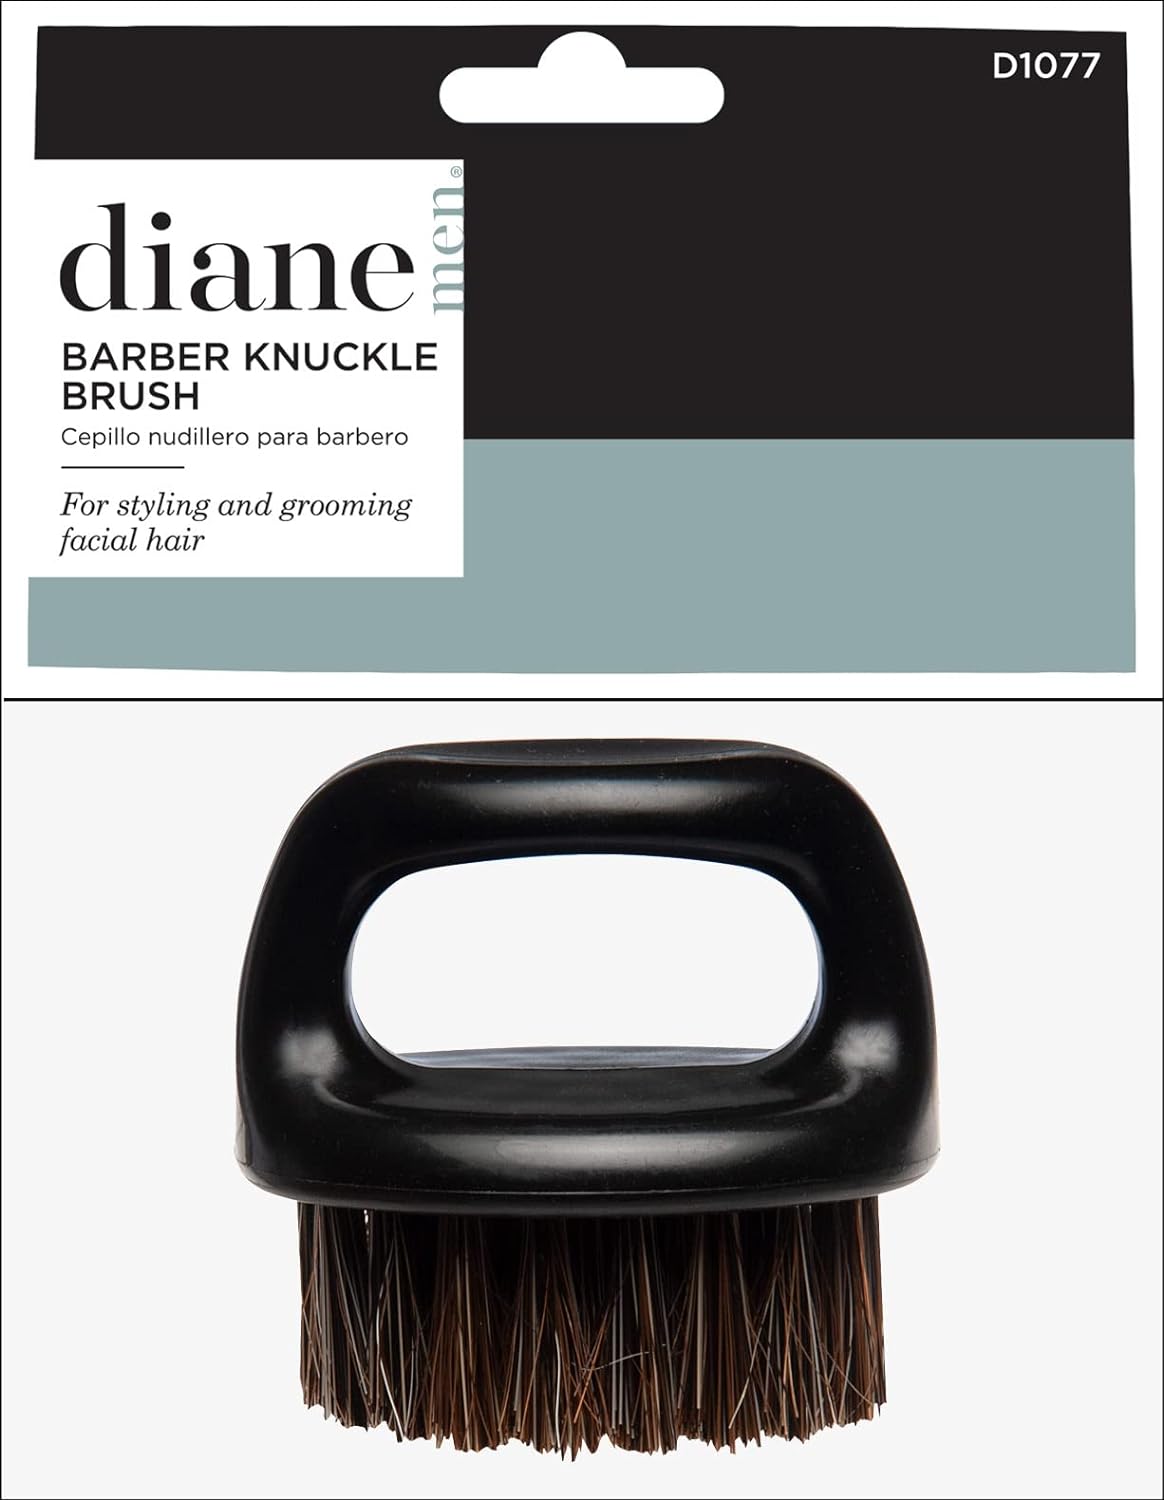 Diane Barber Knuckle Brush, D1077 : Beauty & Personal Care